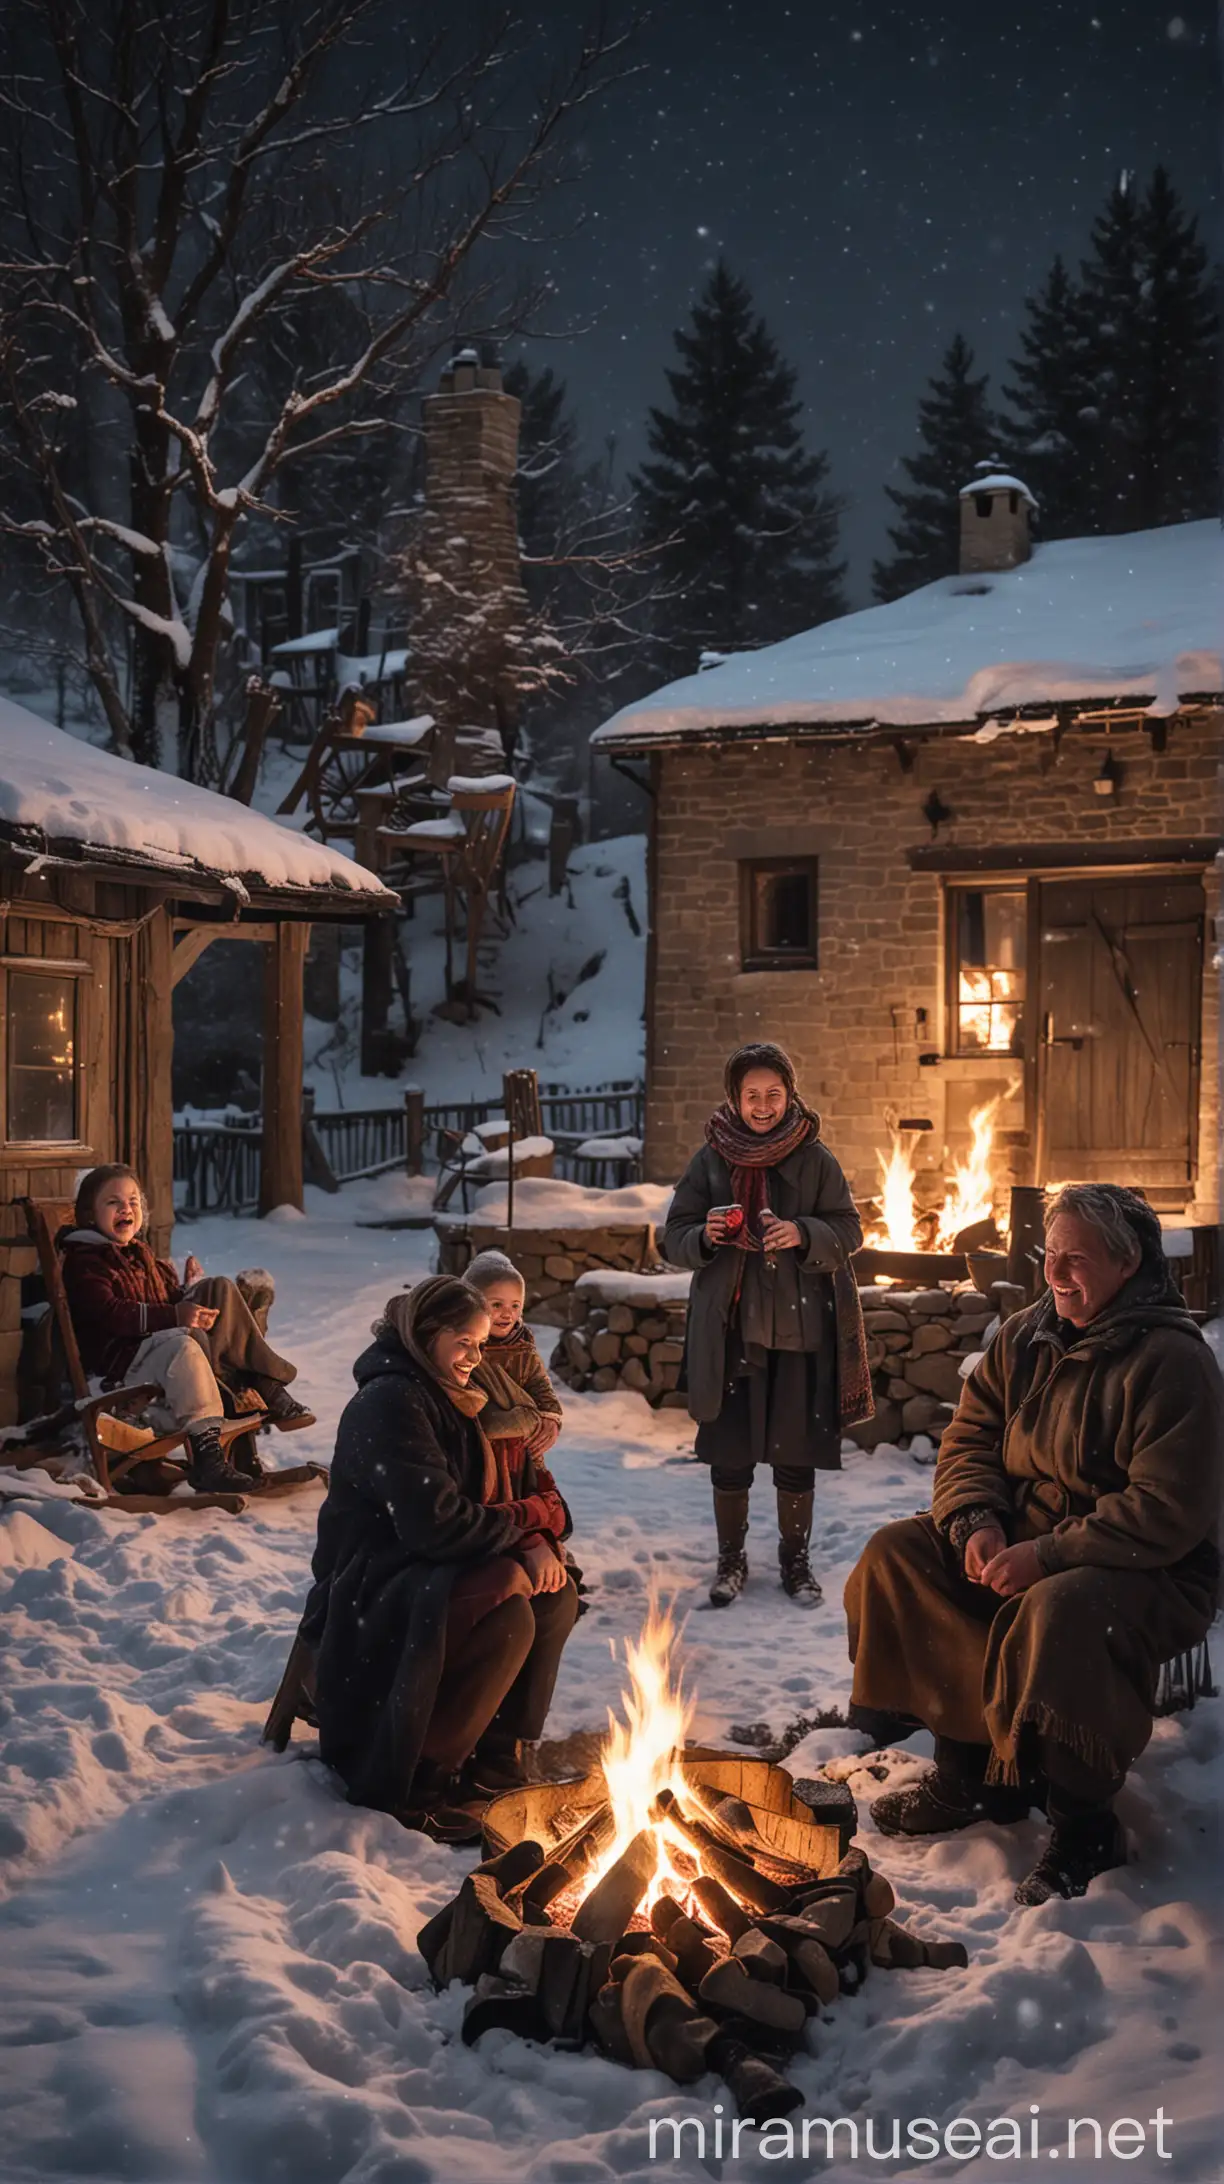 In a quiet village blanketed by snow, a family gathers by the fire, sharing warmth and laughter on a cold winter night.